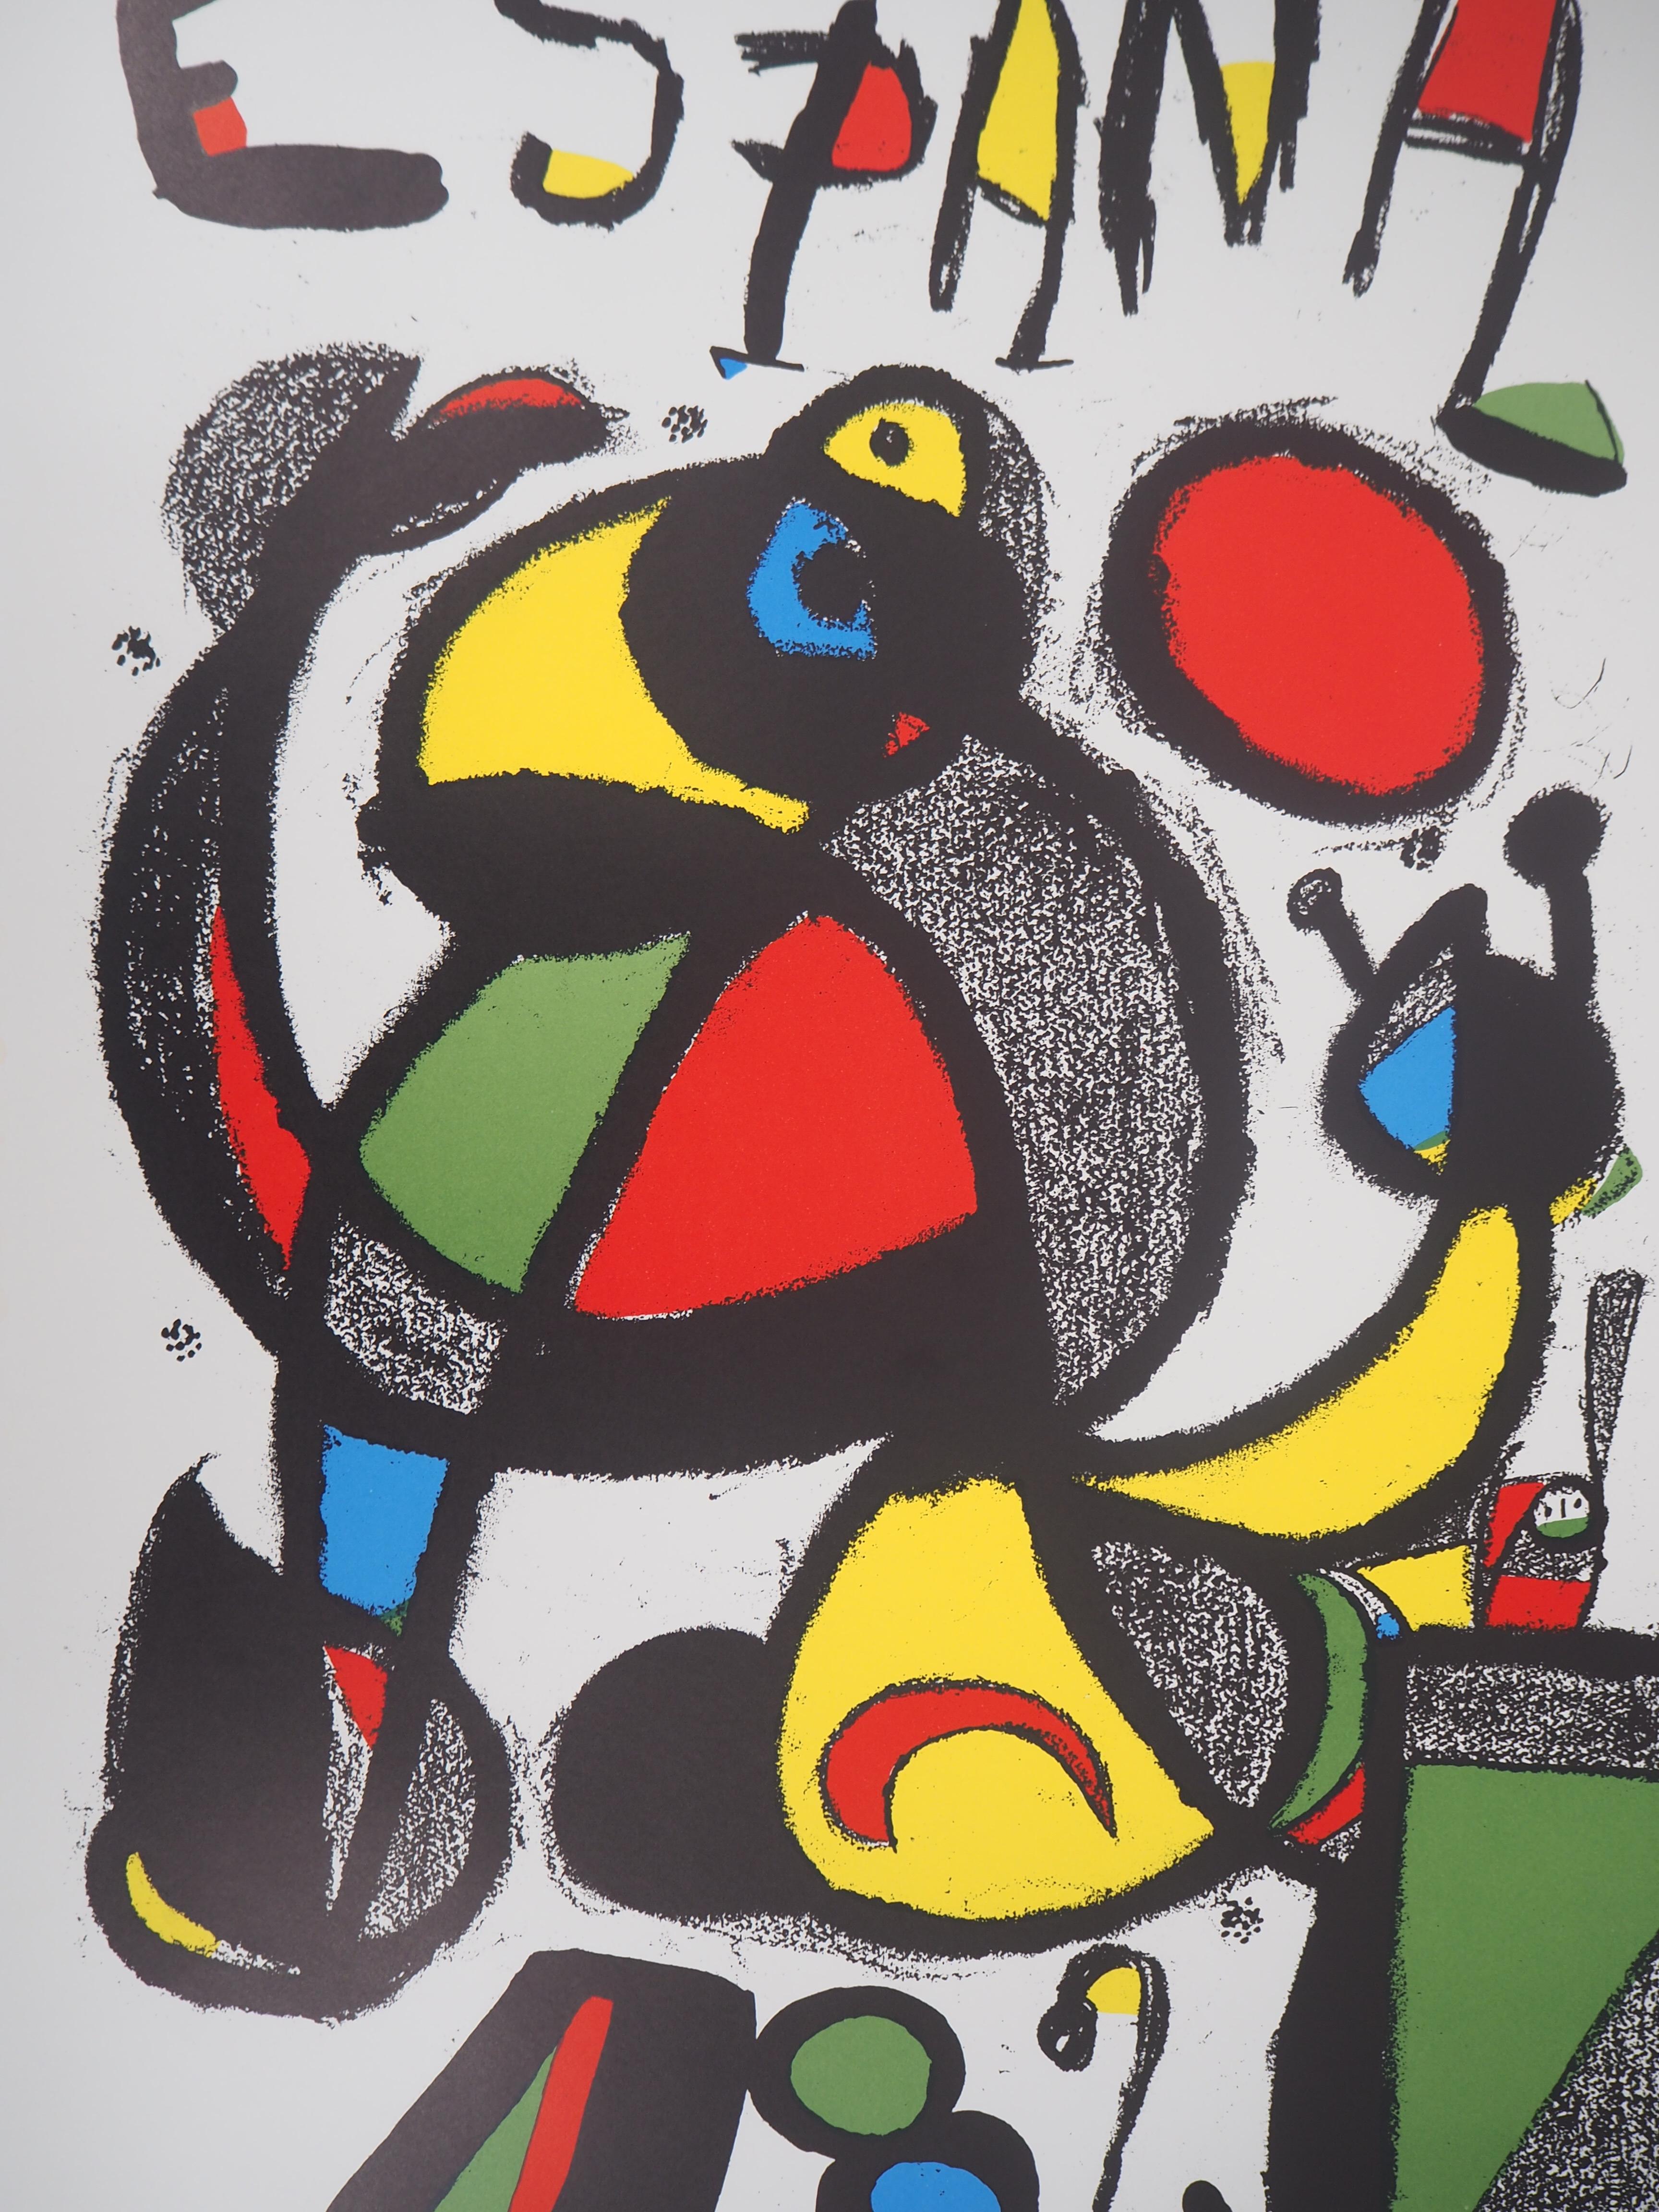 Joan MIRO
Espana, Surrealist figure, 1982

Original lithograph in colors (atelier Arte, Maeght) 
Printed signature in the plate
On thin paper 95 x 60 cm (c. 37.4 x 23.6 in)

References : Miro lithograph, Mourlot, référence #1250

Excellent condition